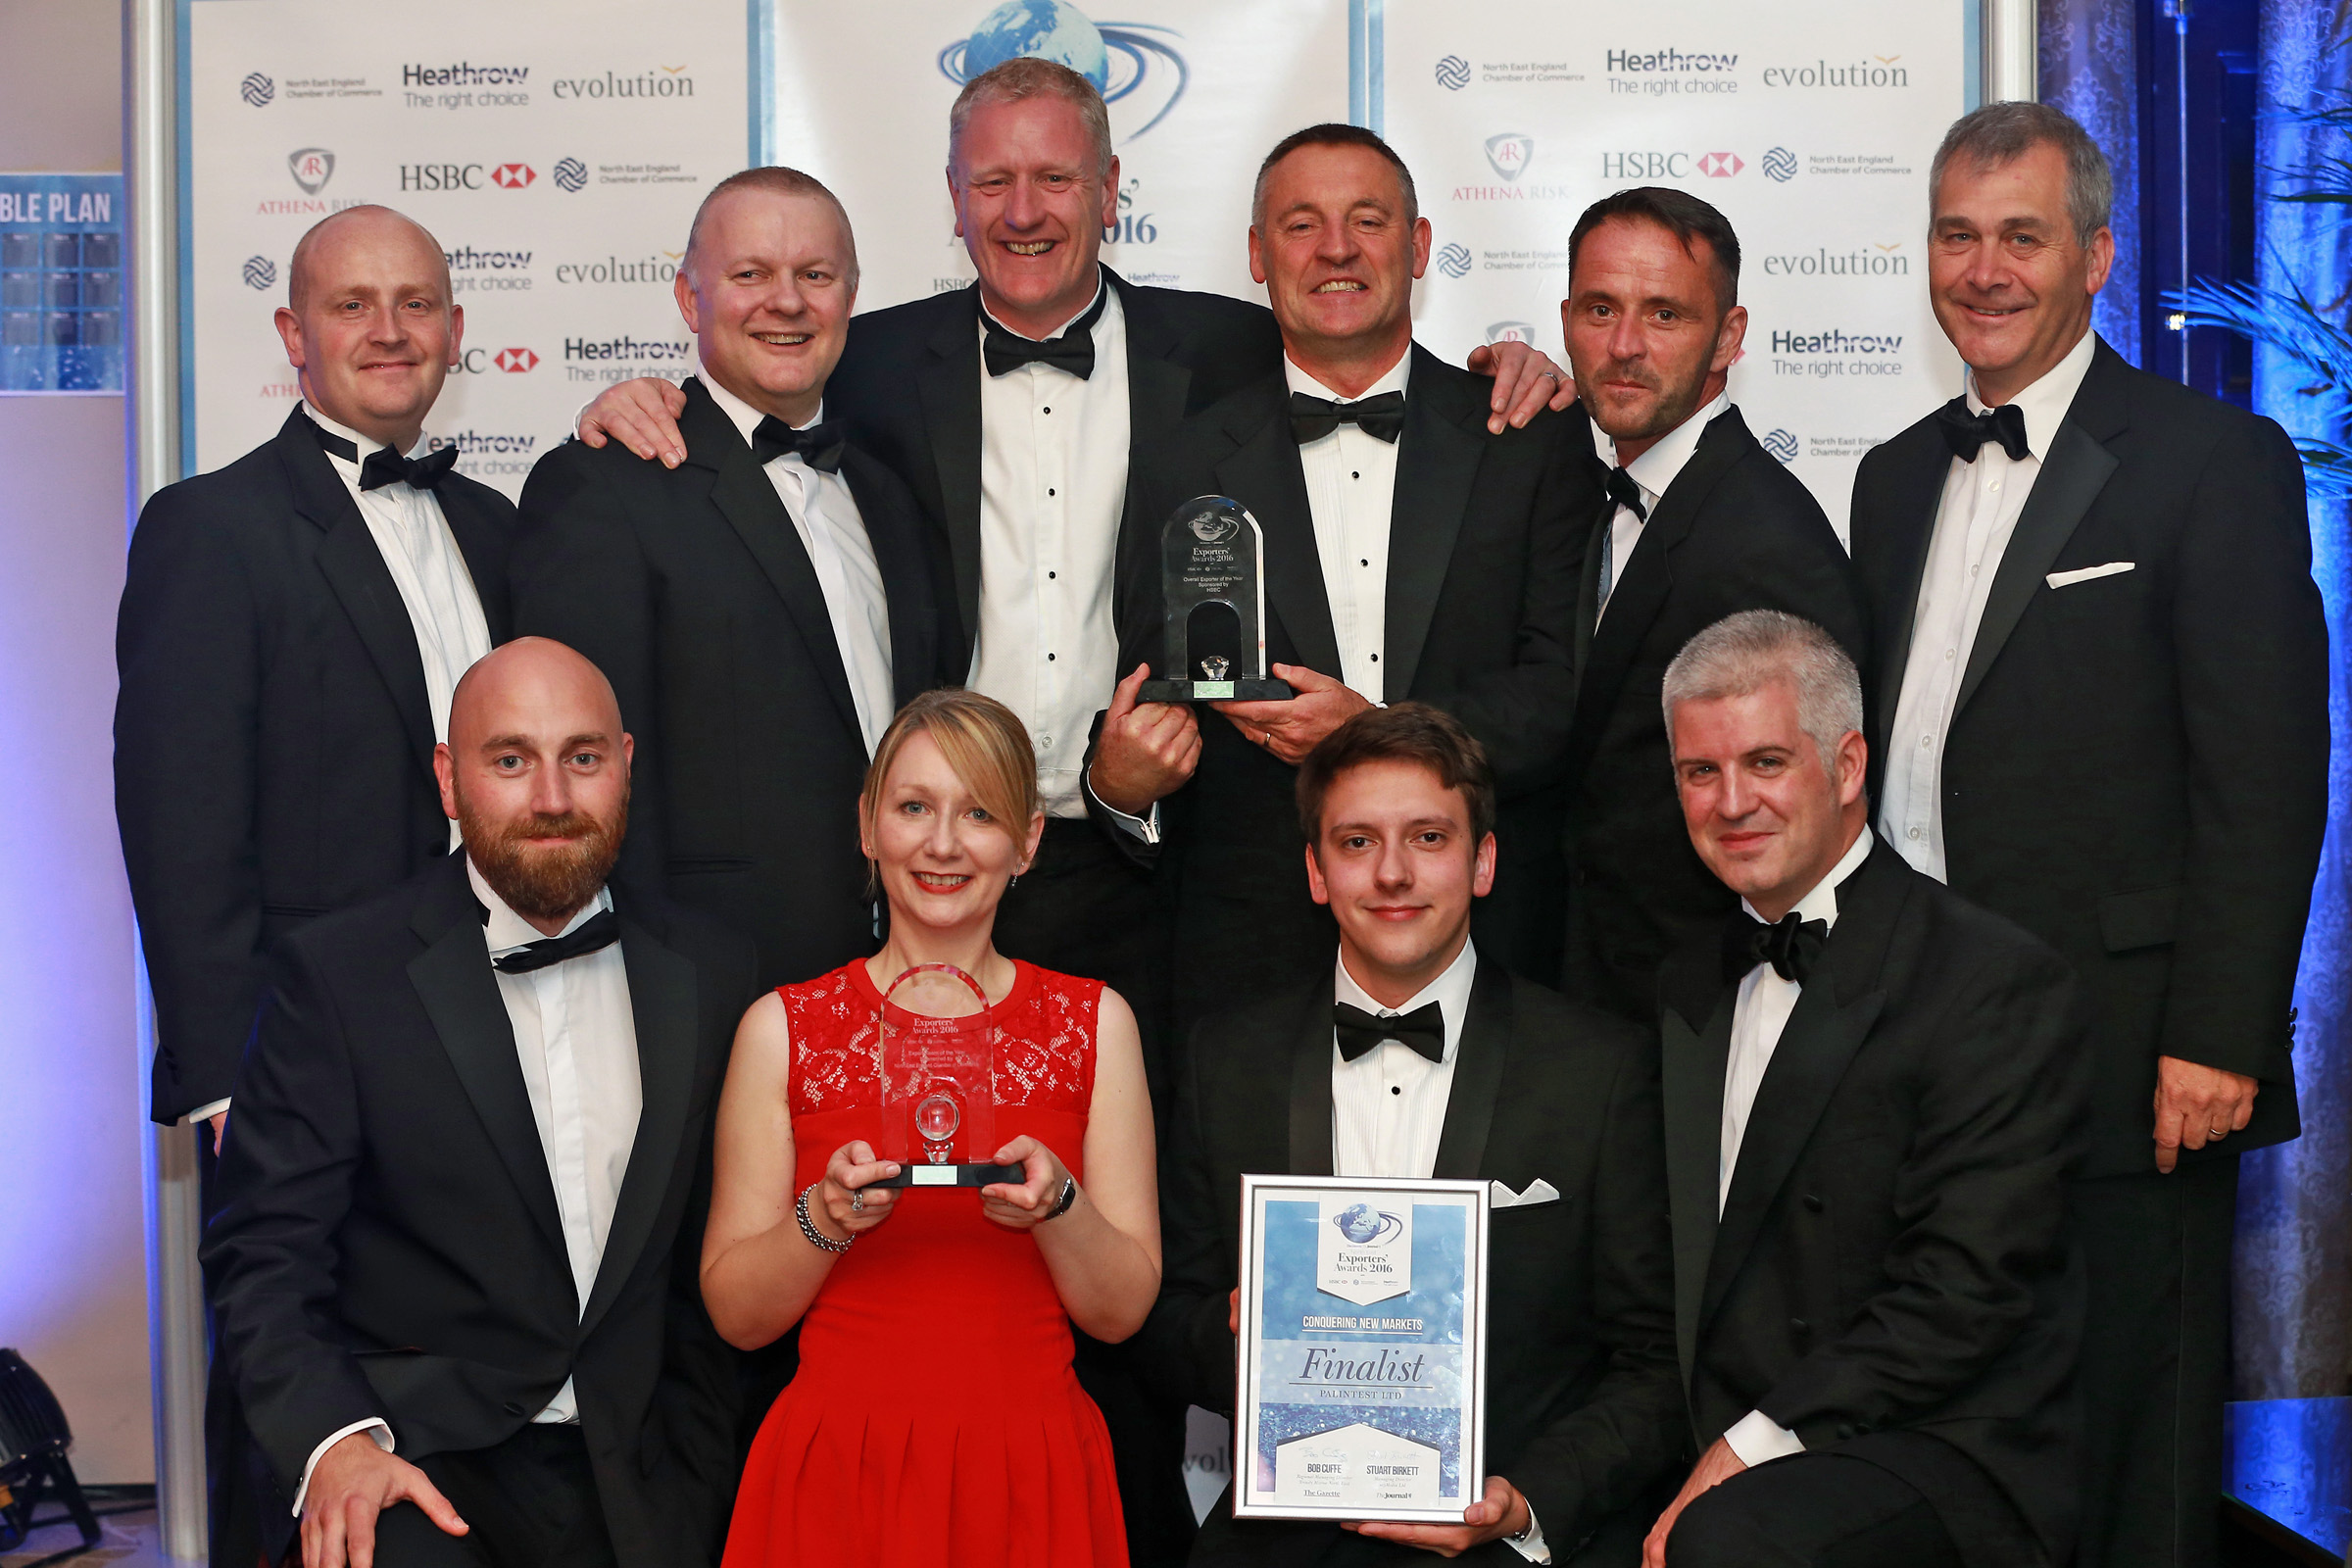 Overall Exporter of the Year winner Dave Sidlow (back row third from left) and his team from Palintest Ltd

The North East Exporters Awards 2016 held at Ramside Hall Hotel